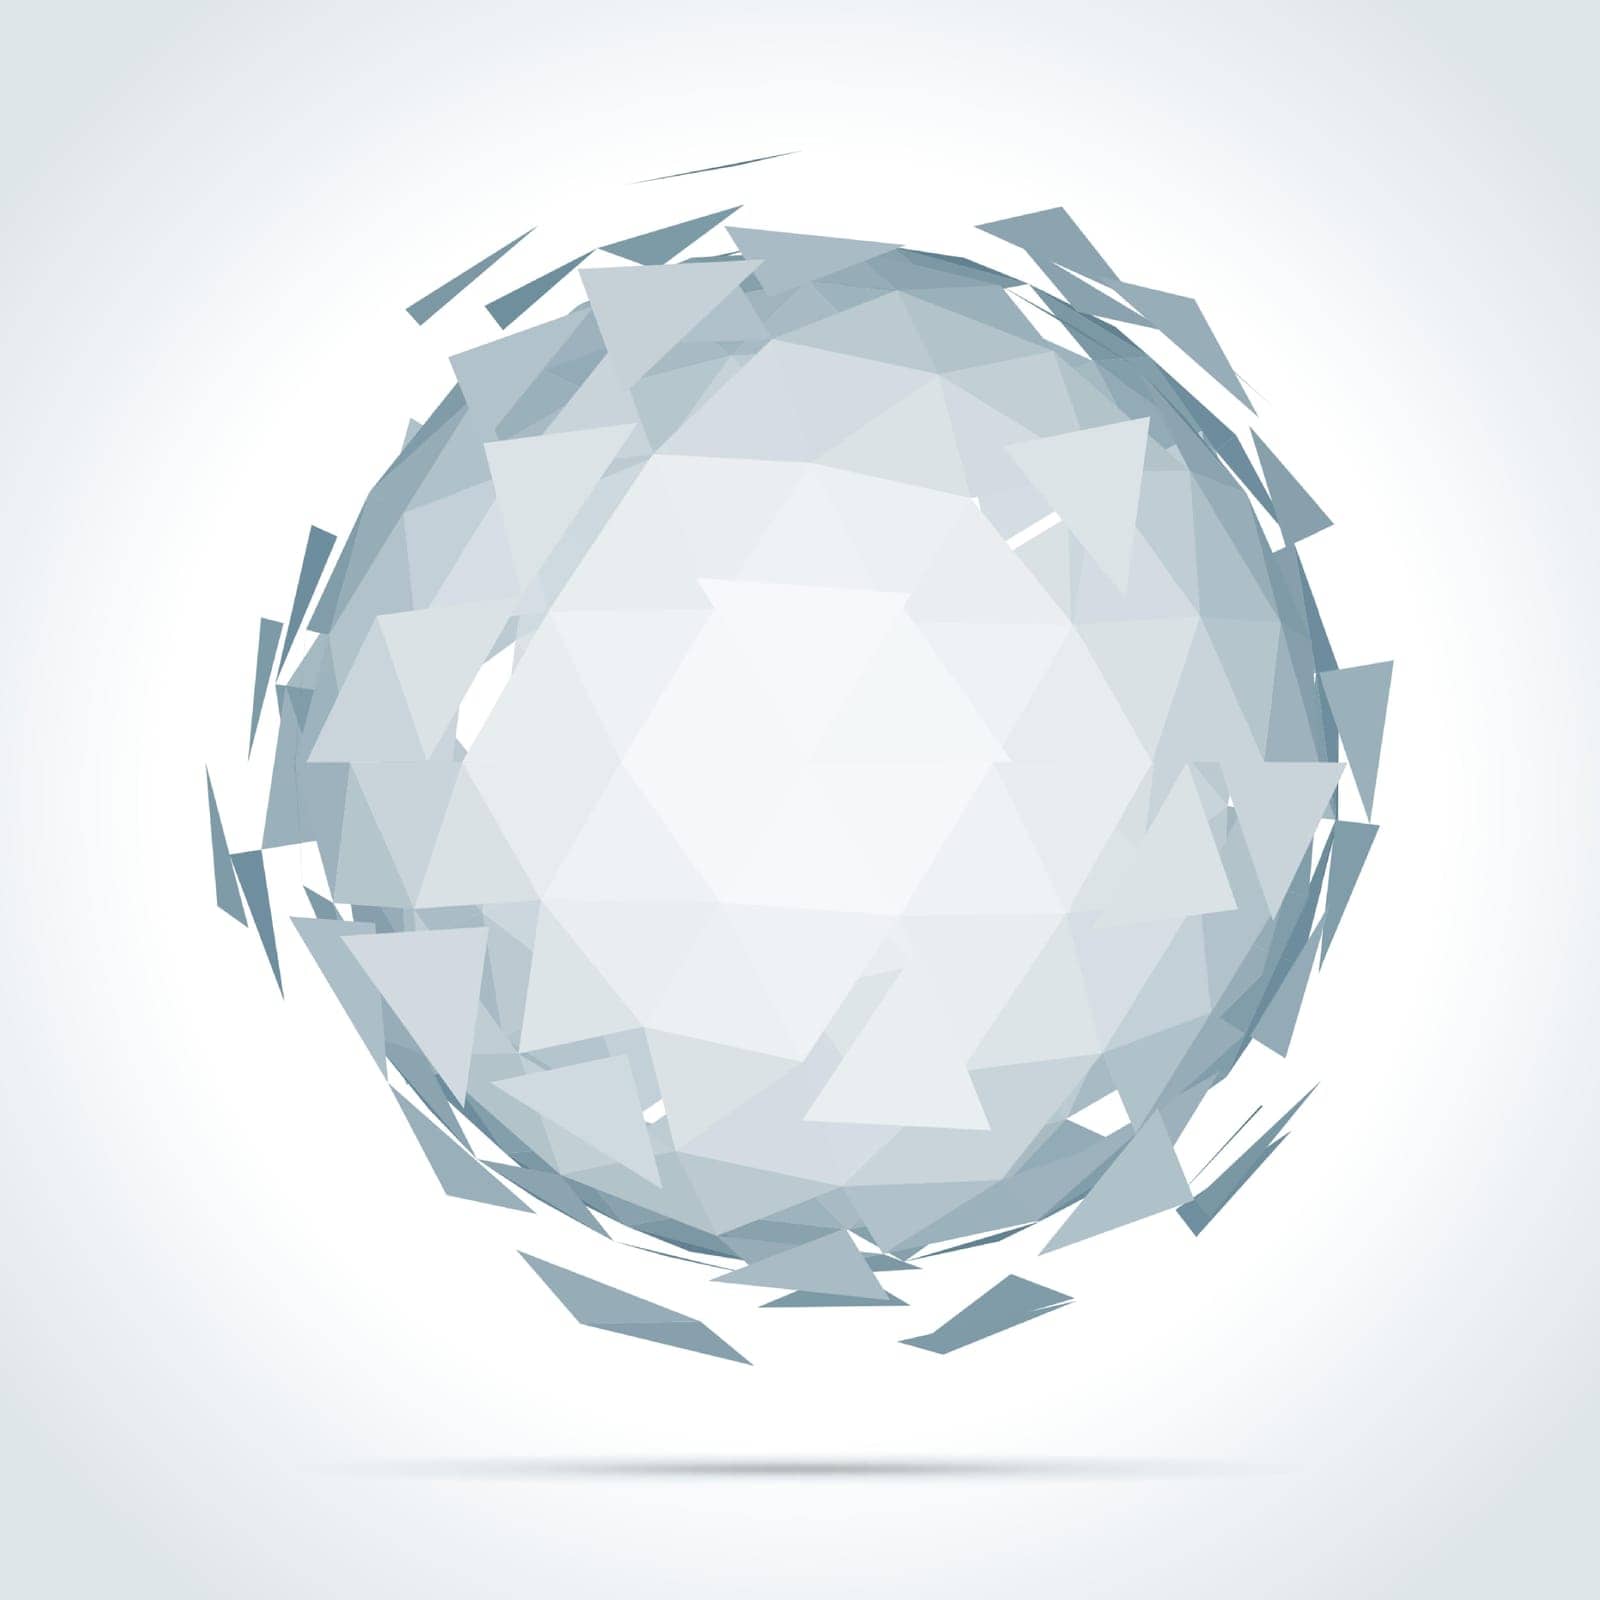 White Diamond on White Background by ProVectors